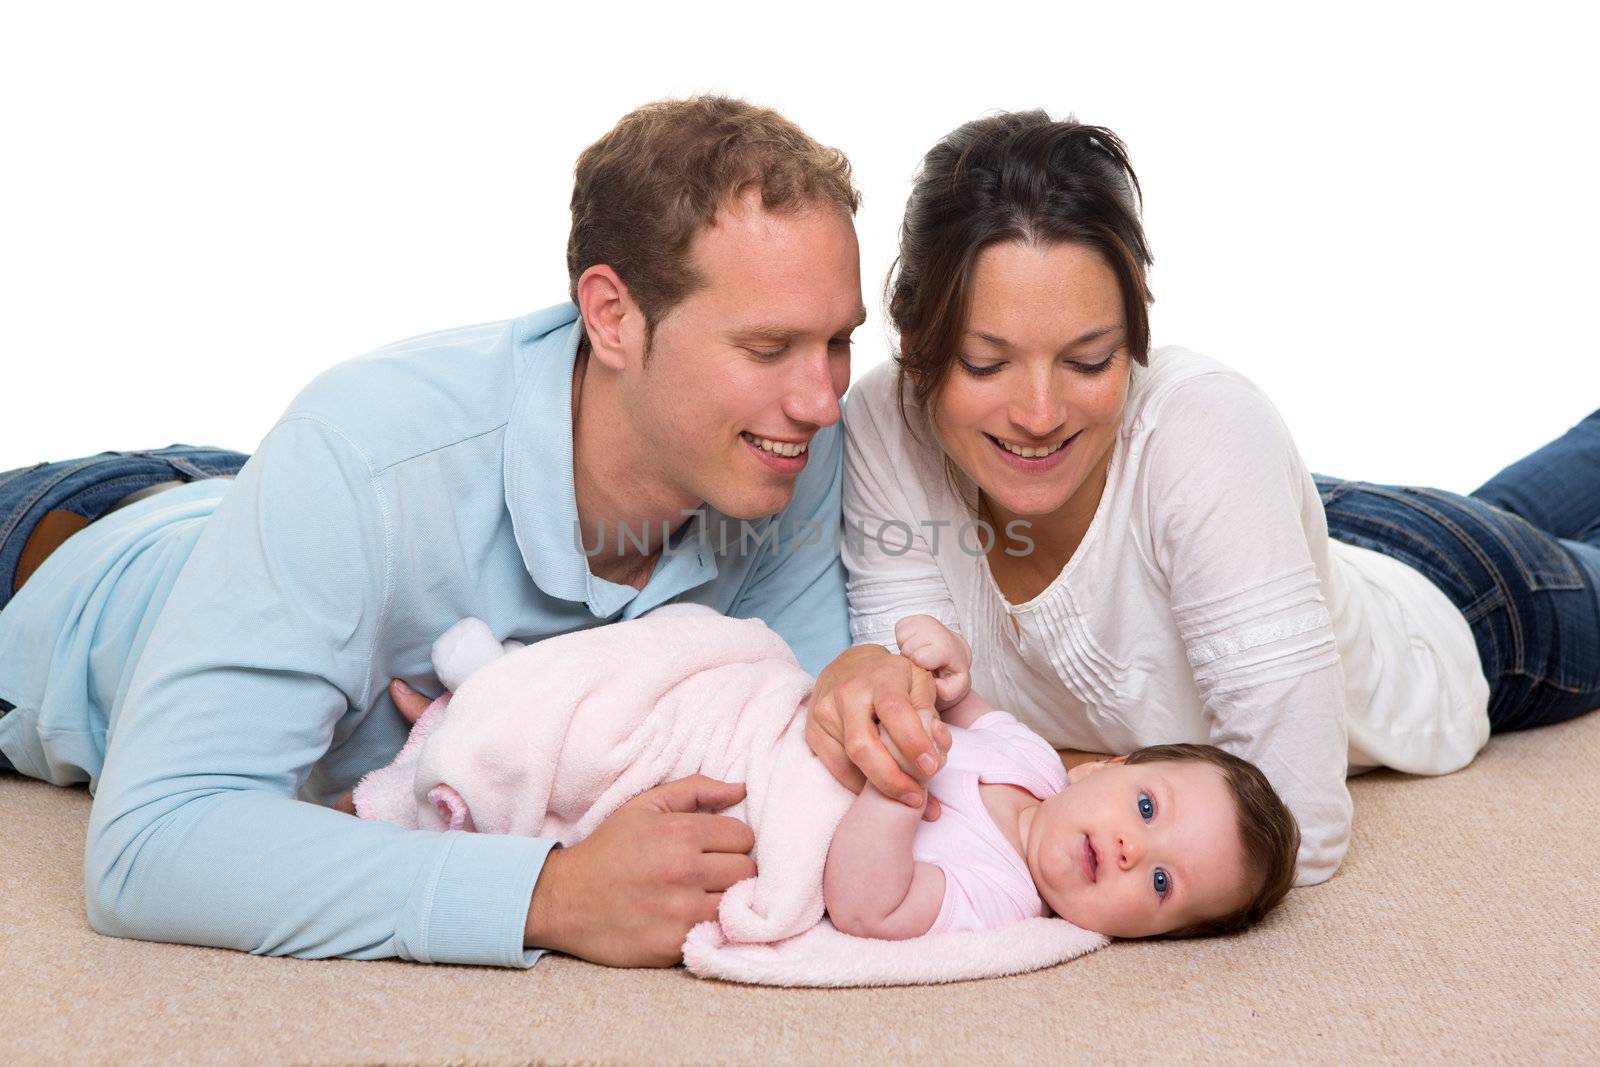 Baby mother and father happy family lying on carpet by lunamarina